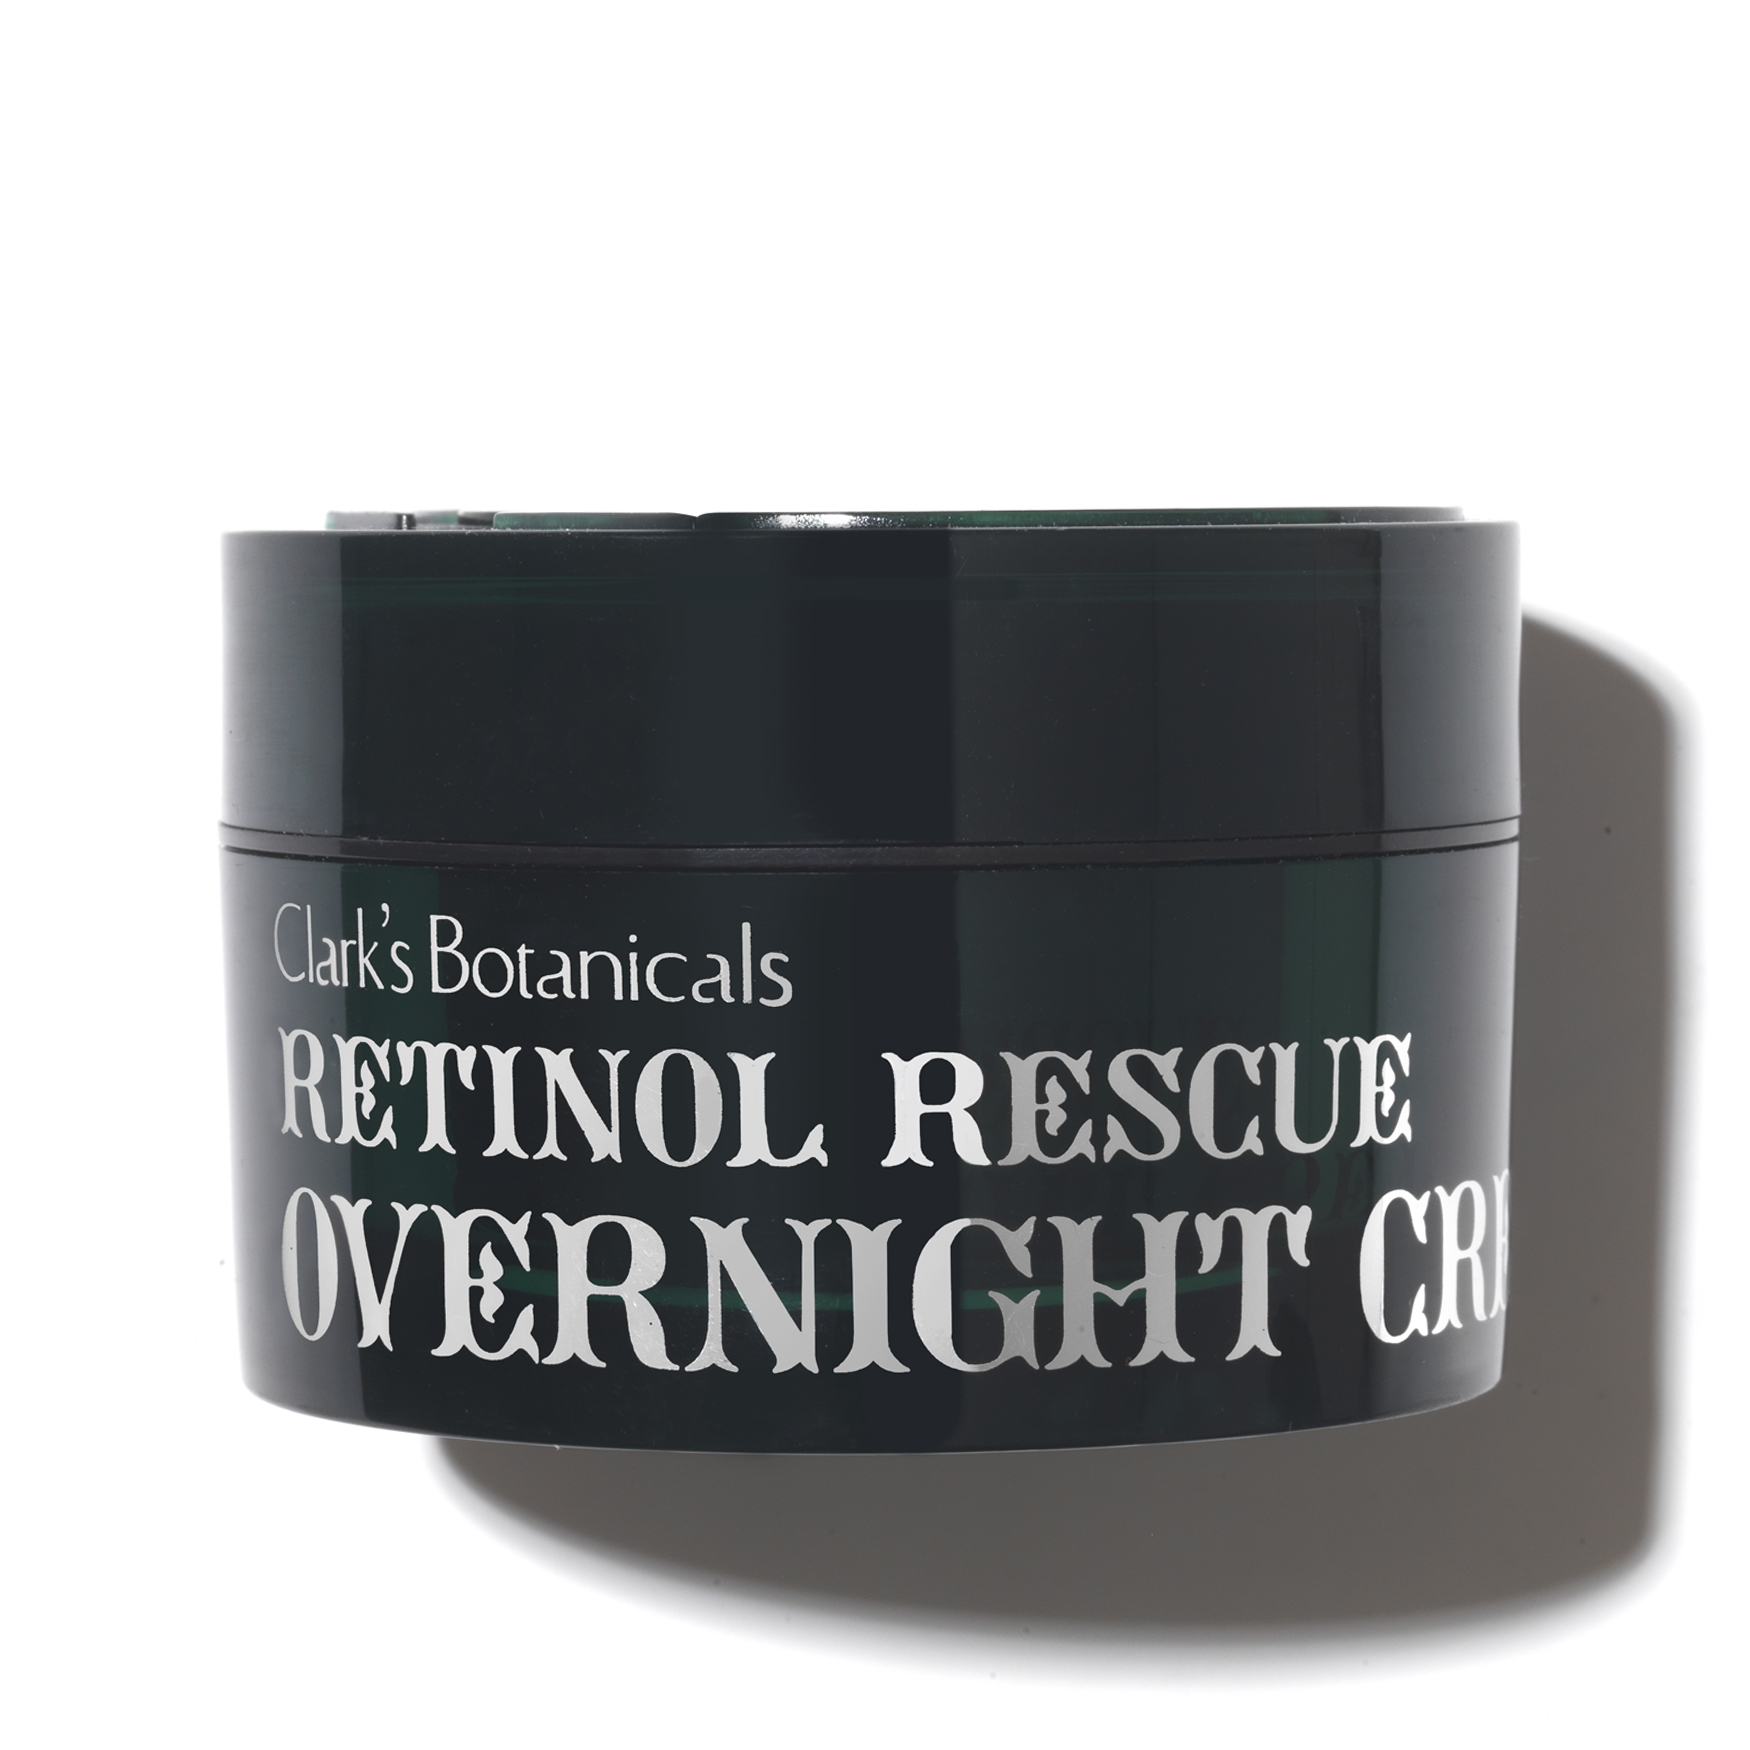 Clarks botanicals retinol rescue overnight cream with calming colloidal oatmeal Clark S Botanicals Retinol Rescue Overnight Cream Space Nk